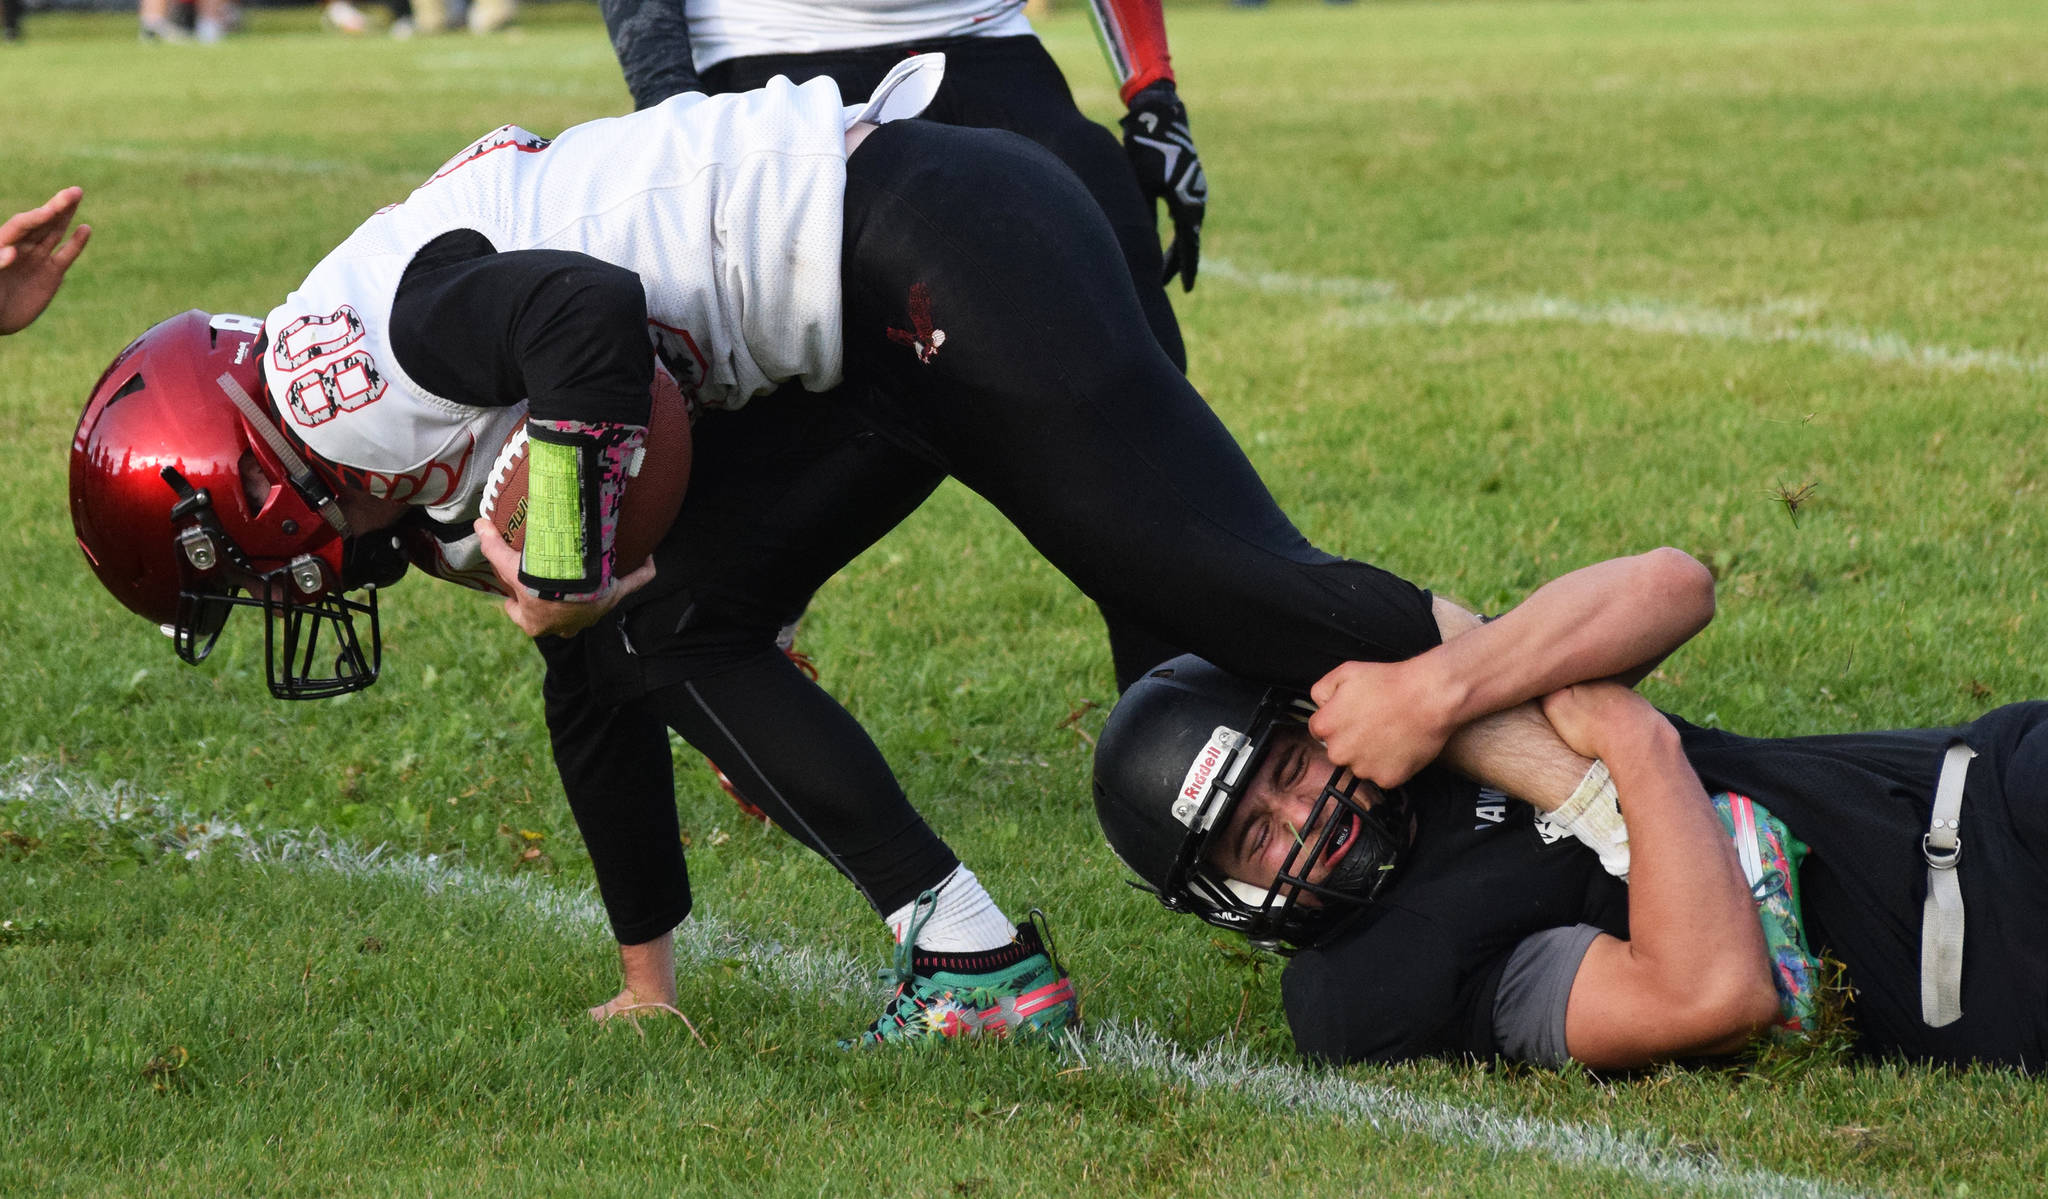 Houston quarterback Gavin Mulhaney attempts to shed the tackle of Nikiski’s Caileb Payne, Friday, Sept. 20, 2019, at Nikiski High School. (Photo by Joey Klecka/Peninsula Clarion)